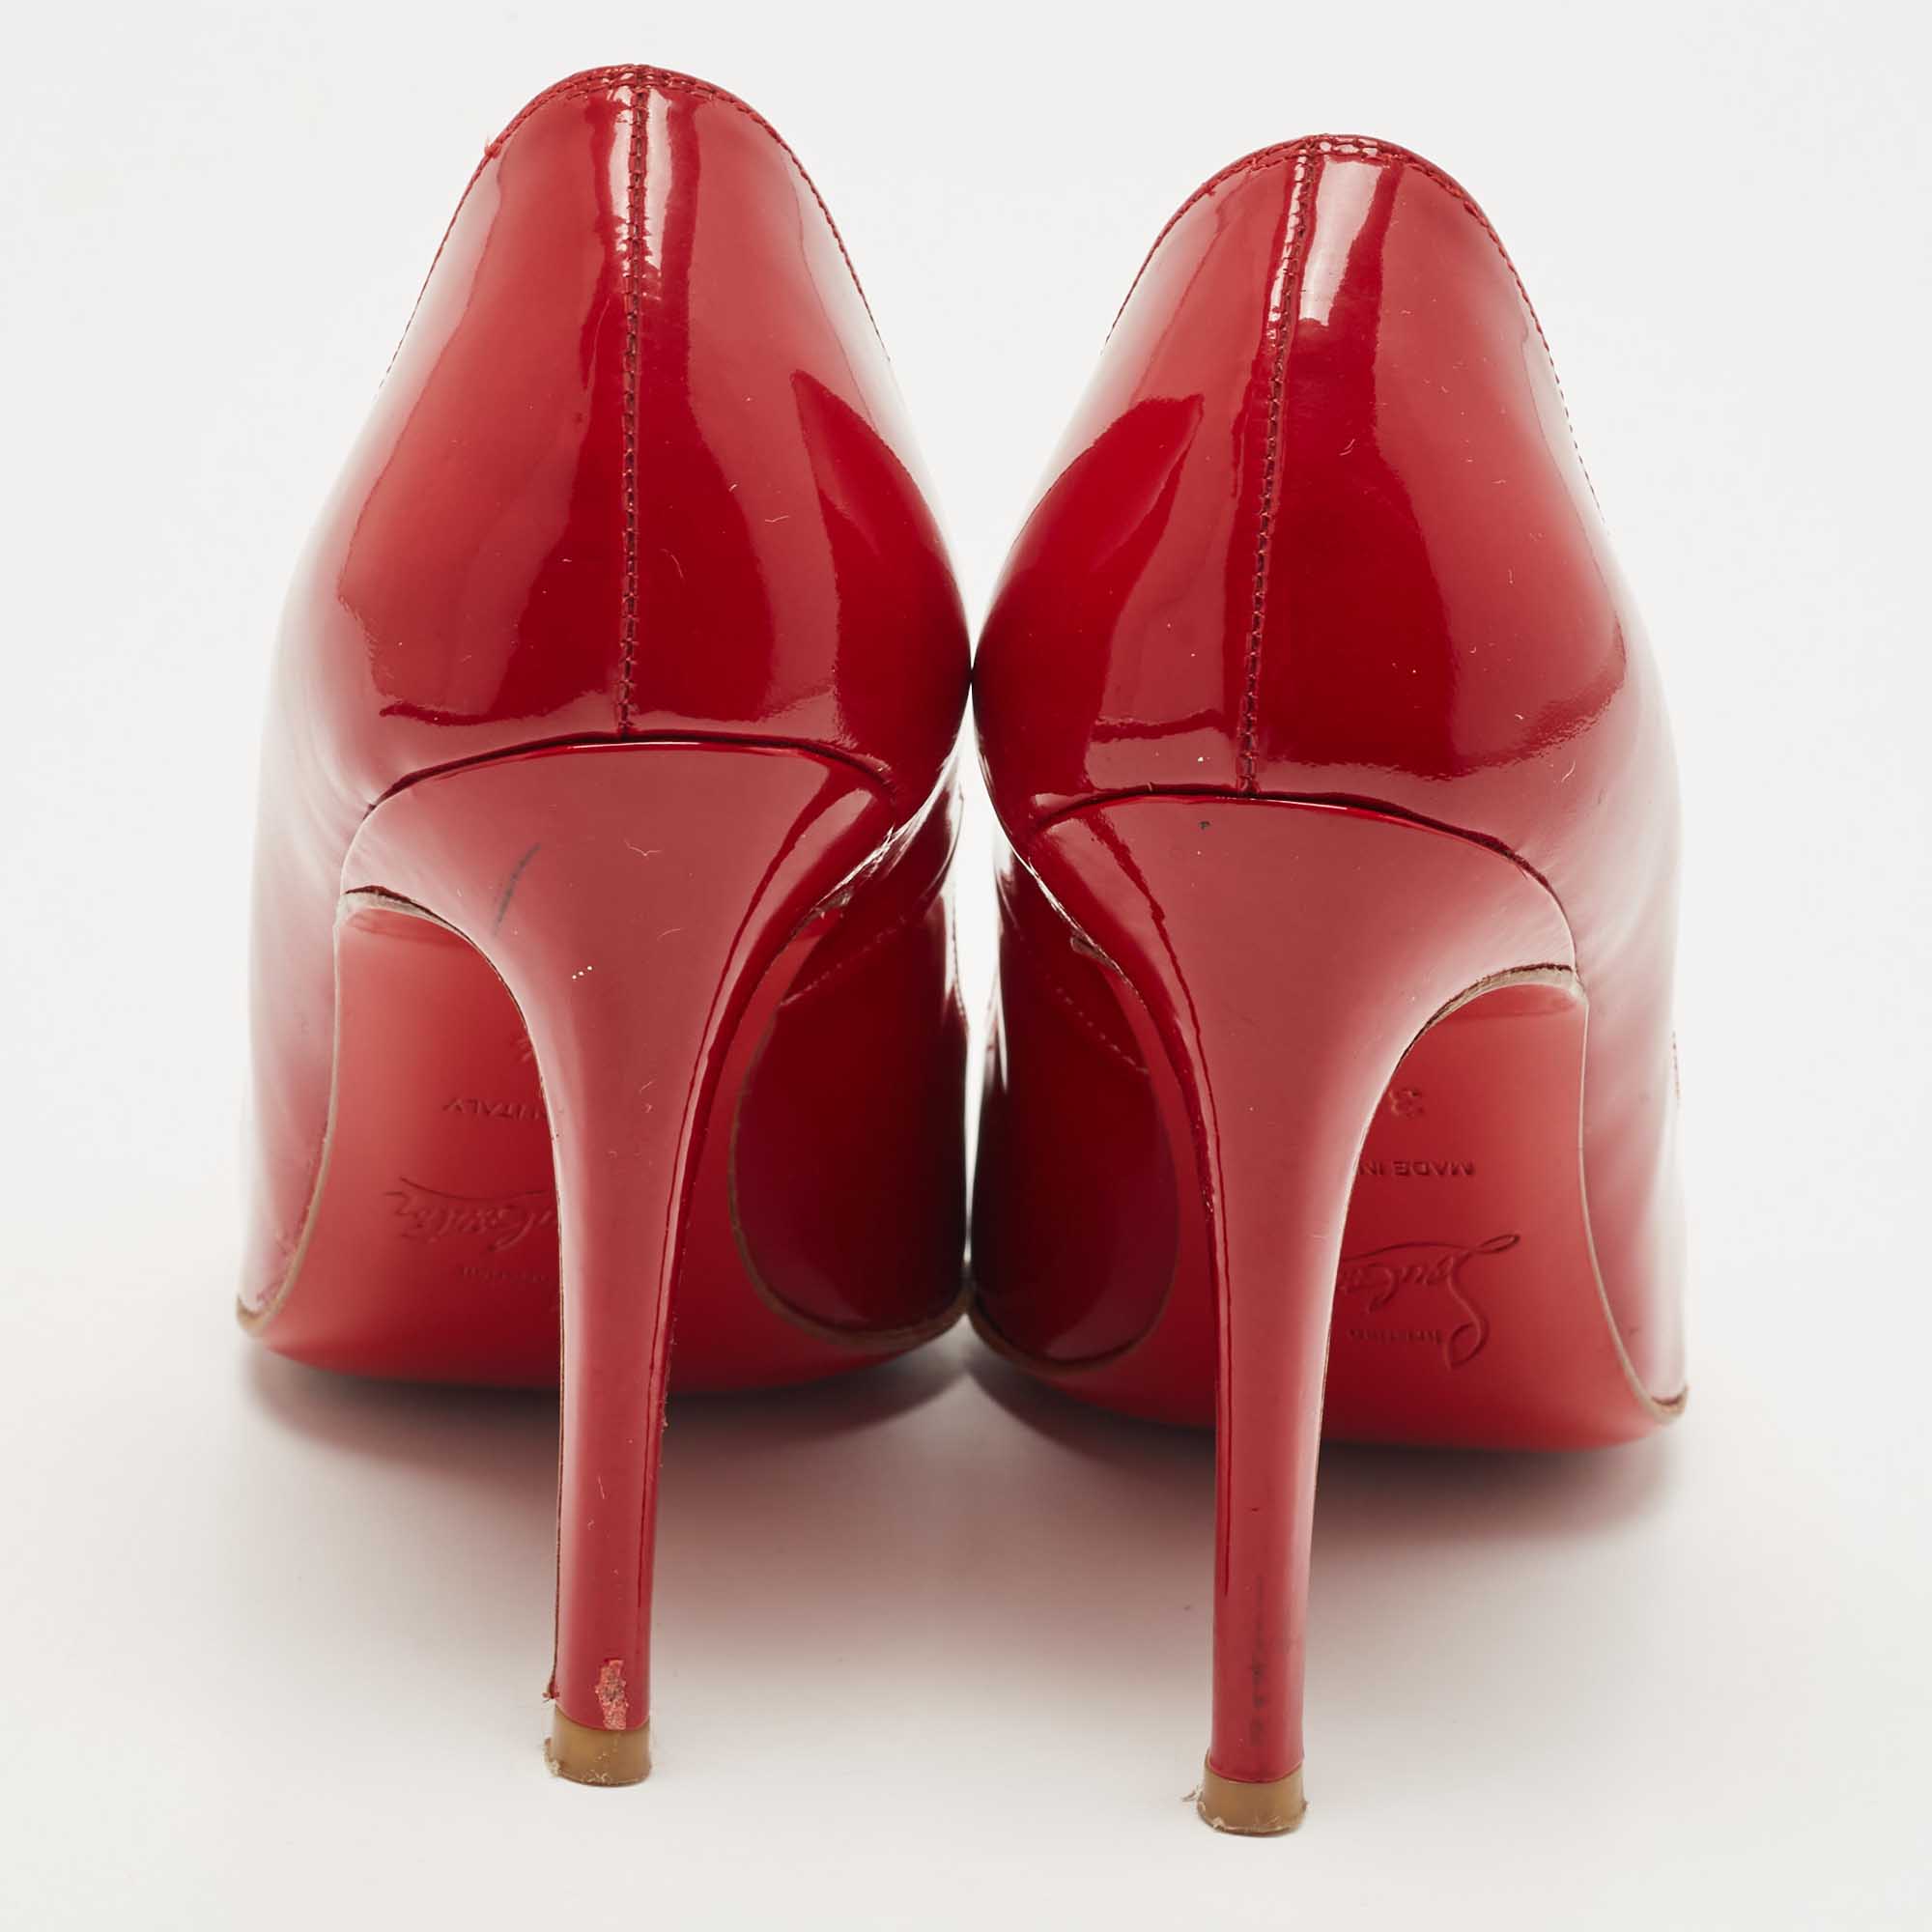 Christian Louboutin Red Patent Simple Pumps Size 34.5